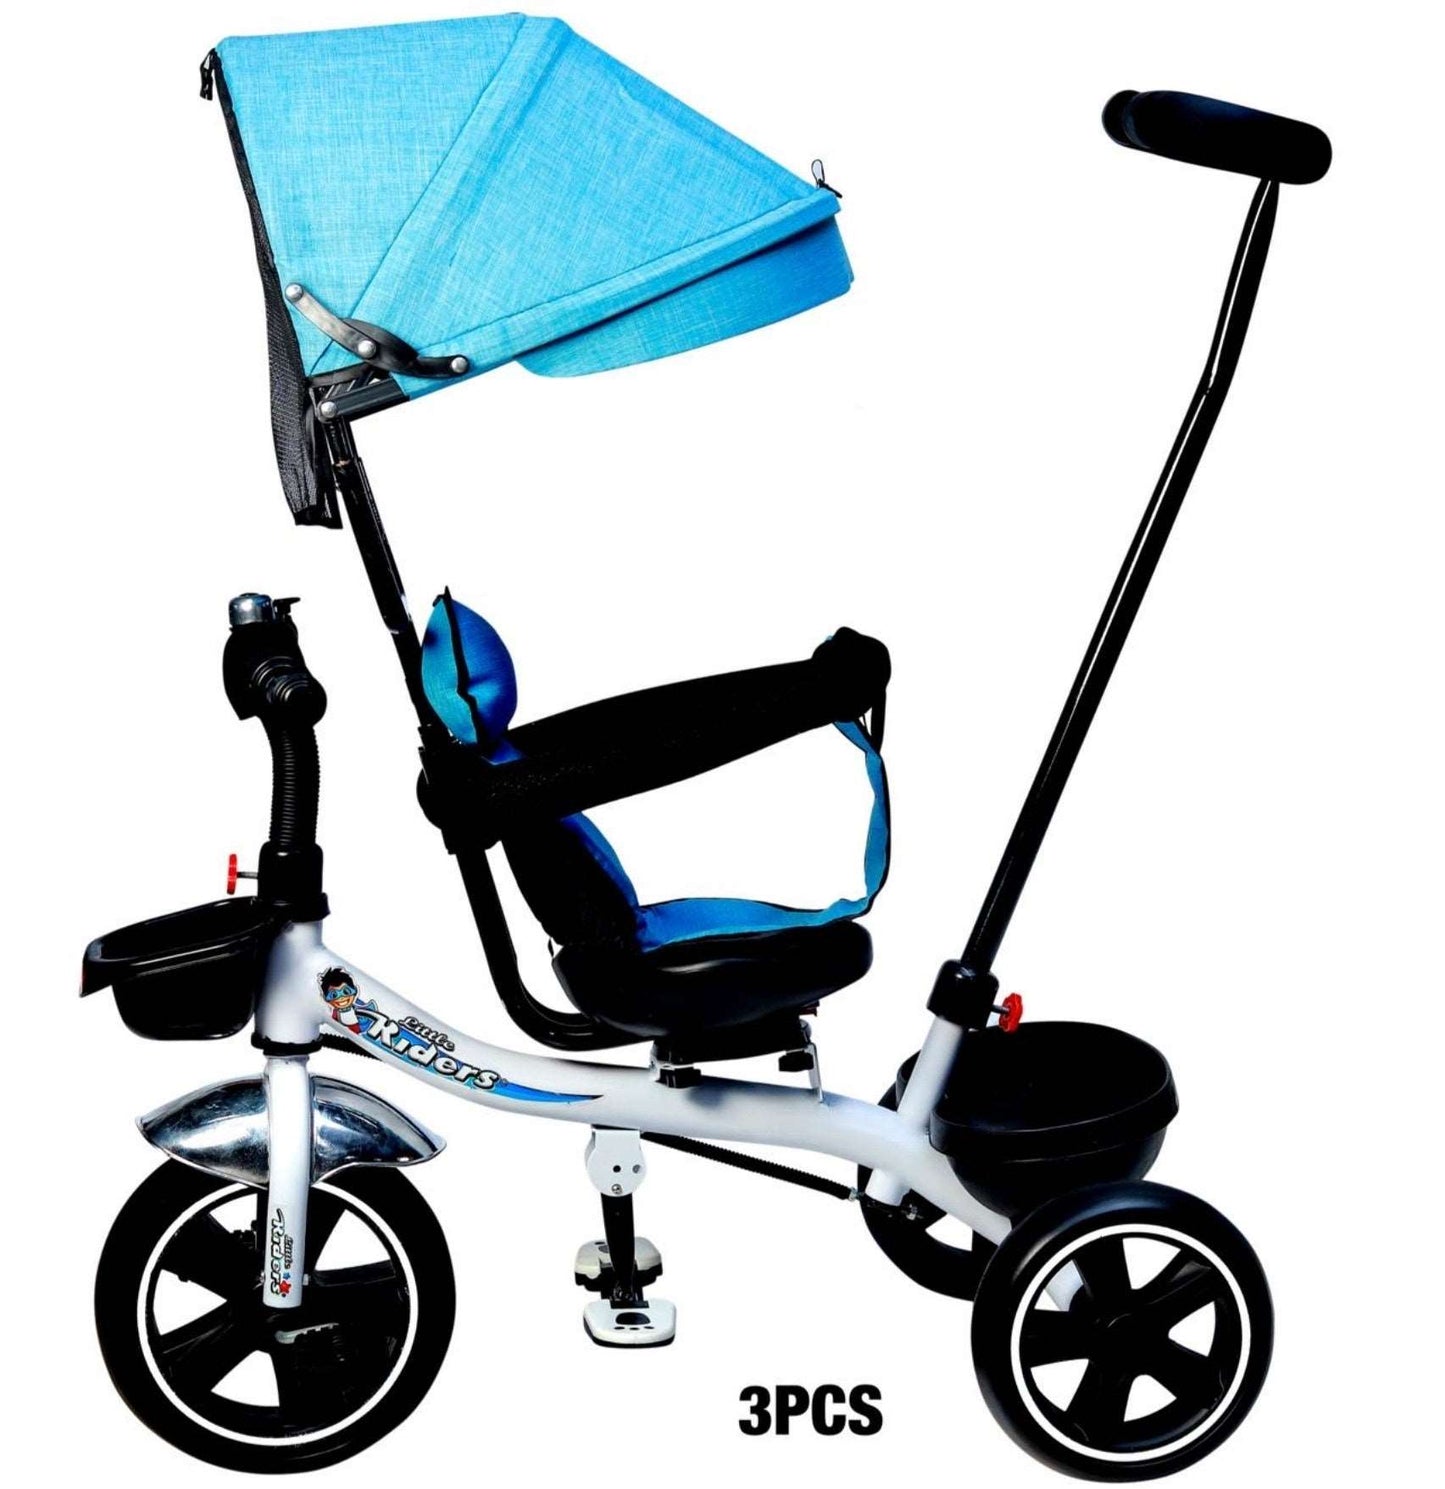 AZI Tricycle for kids  2021 Kids tricycle children good quality baby tricycle new models children